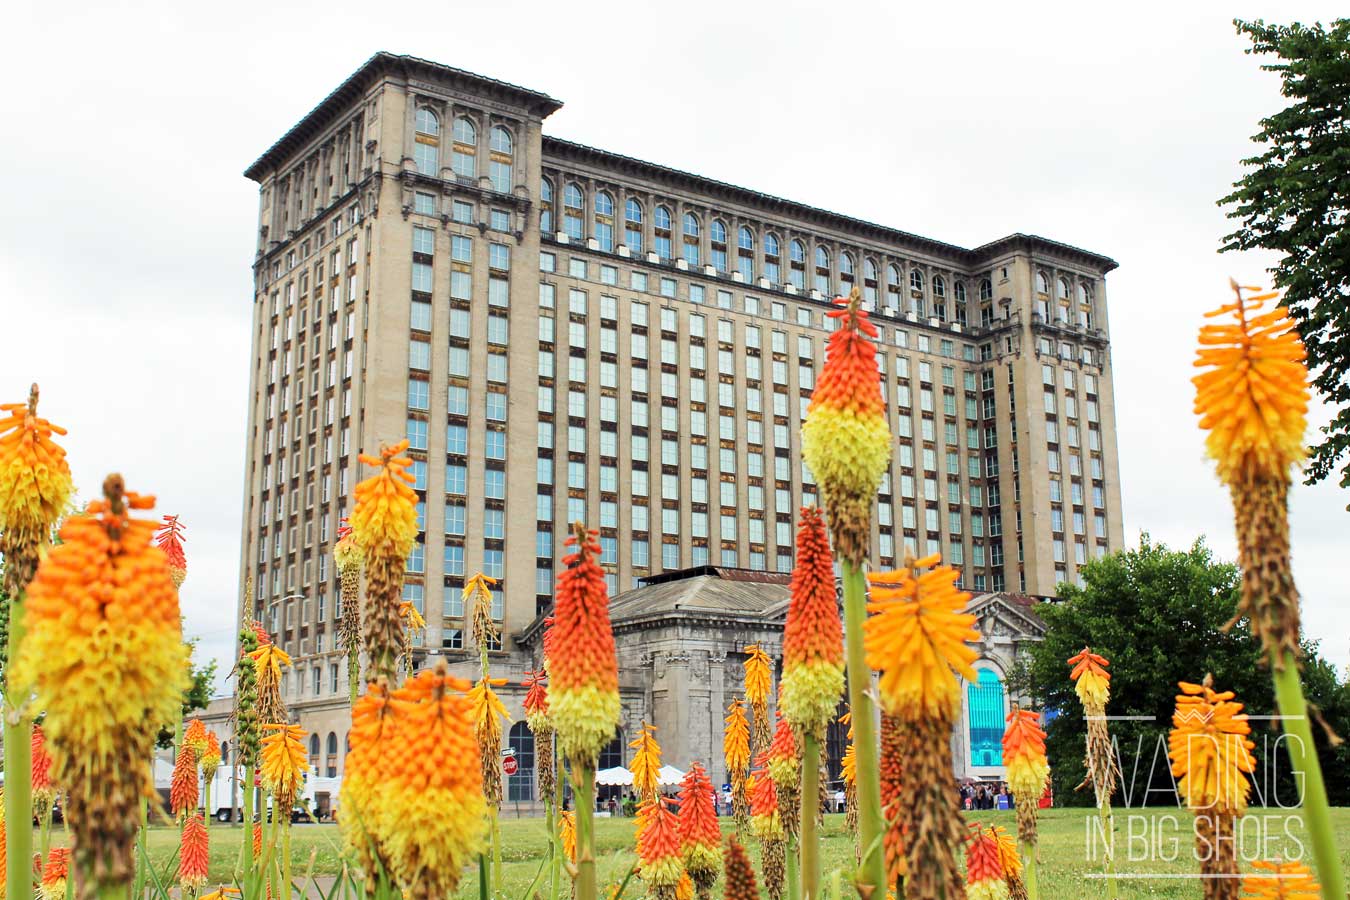 A Look Inside The Soon-To-Reopen Michigan Central Station (via Wading in Big Shoes)